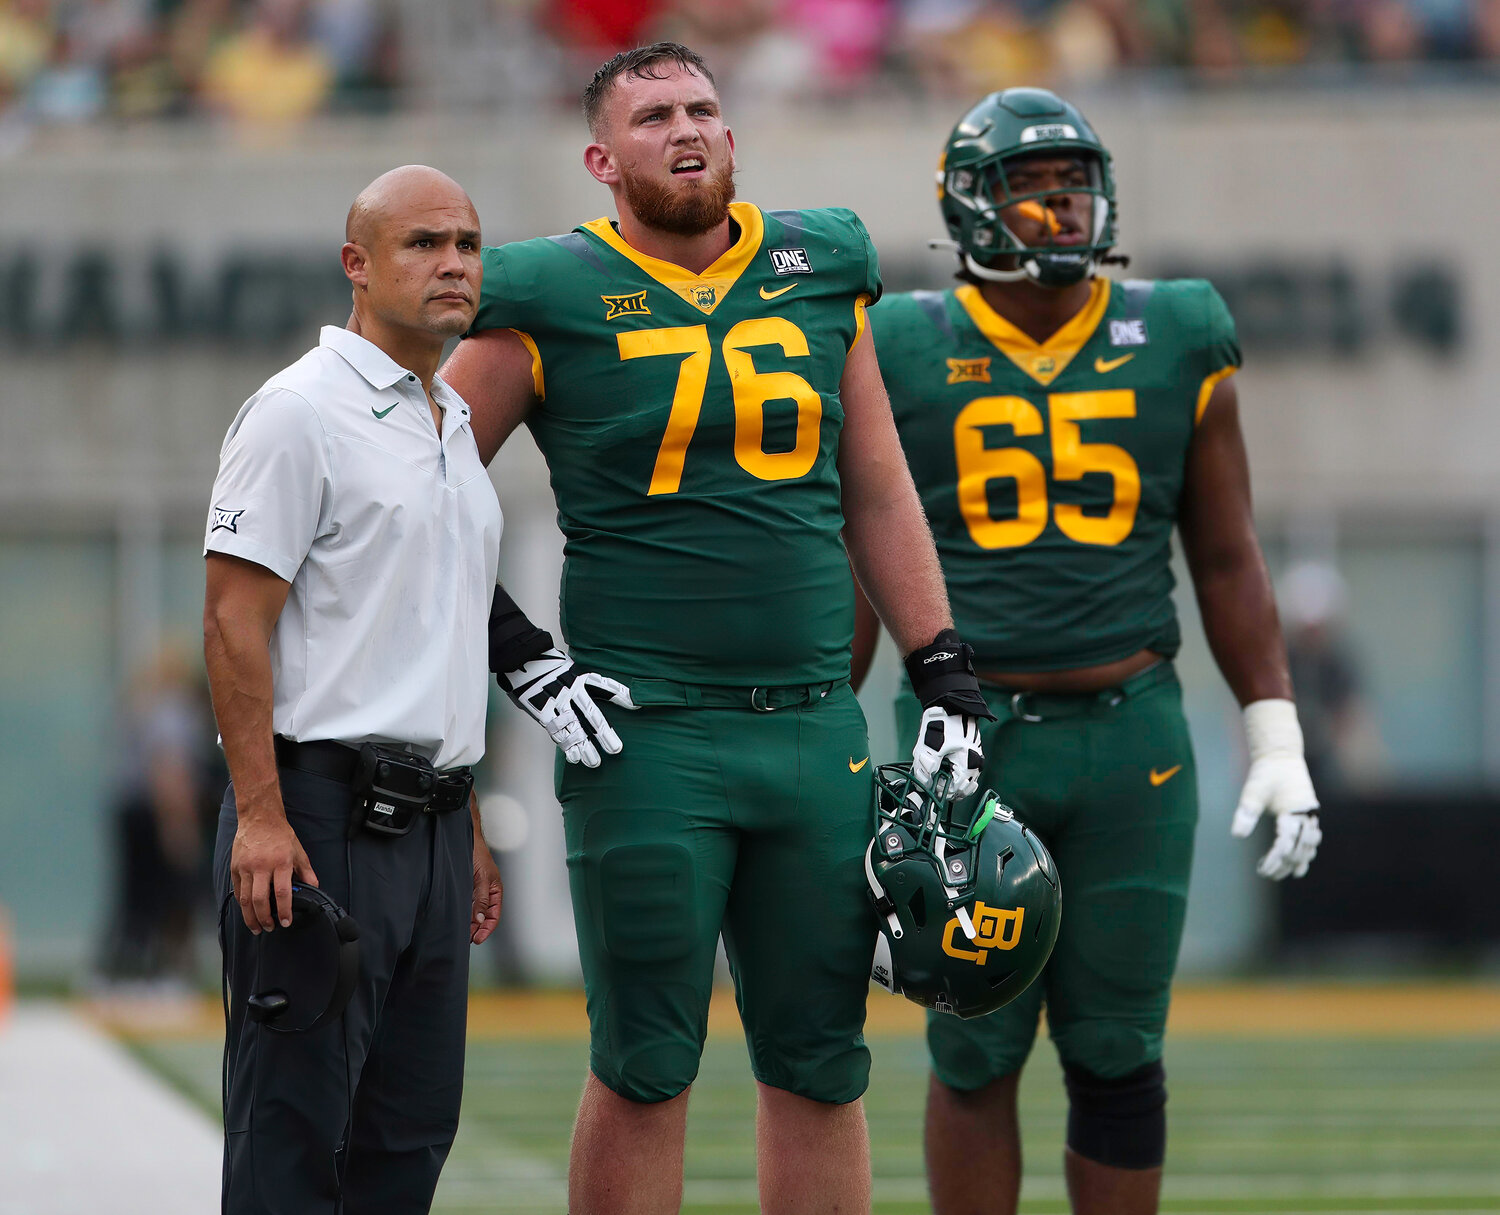 Baylor offensive lineman Connor Galvin (76) and offensive lineman Micah Mazzccua (65) watch the video board with head coach Dave Aranda during a college football game between Baylor and Albany in Waco, Texas, on Sept. 3, 2022.